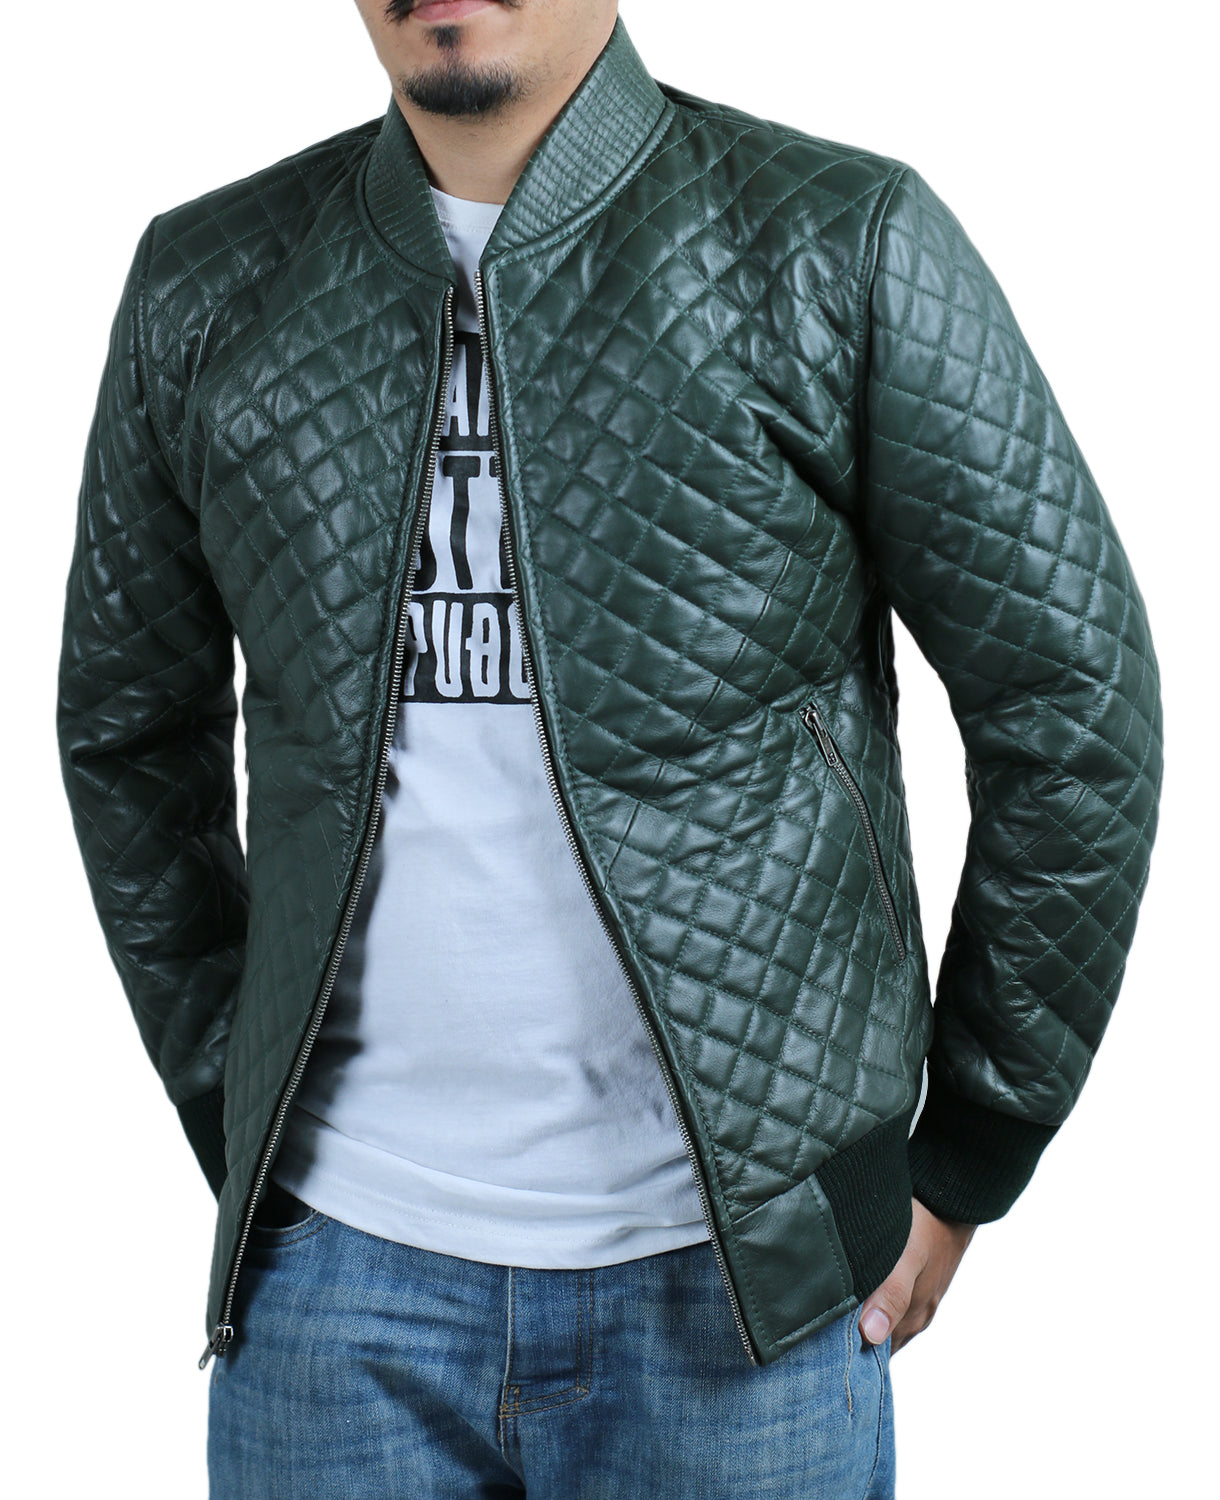 Green@Glimmerix Green Bomber Leather Jacket@glimmerix-green-bomber-leather-jacket